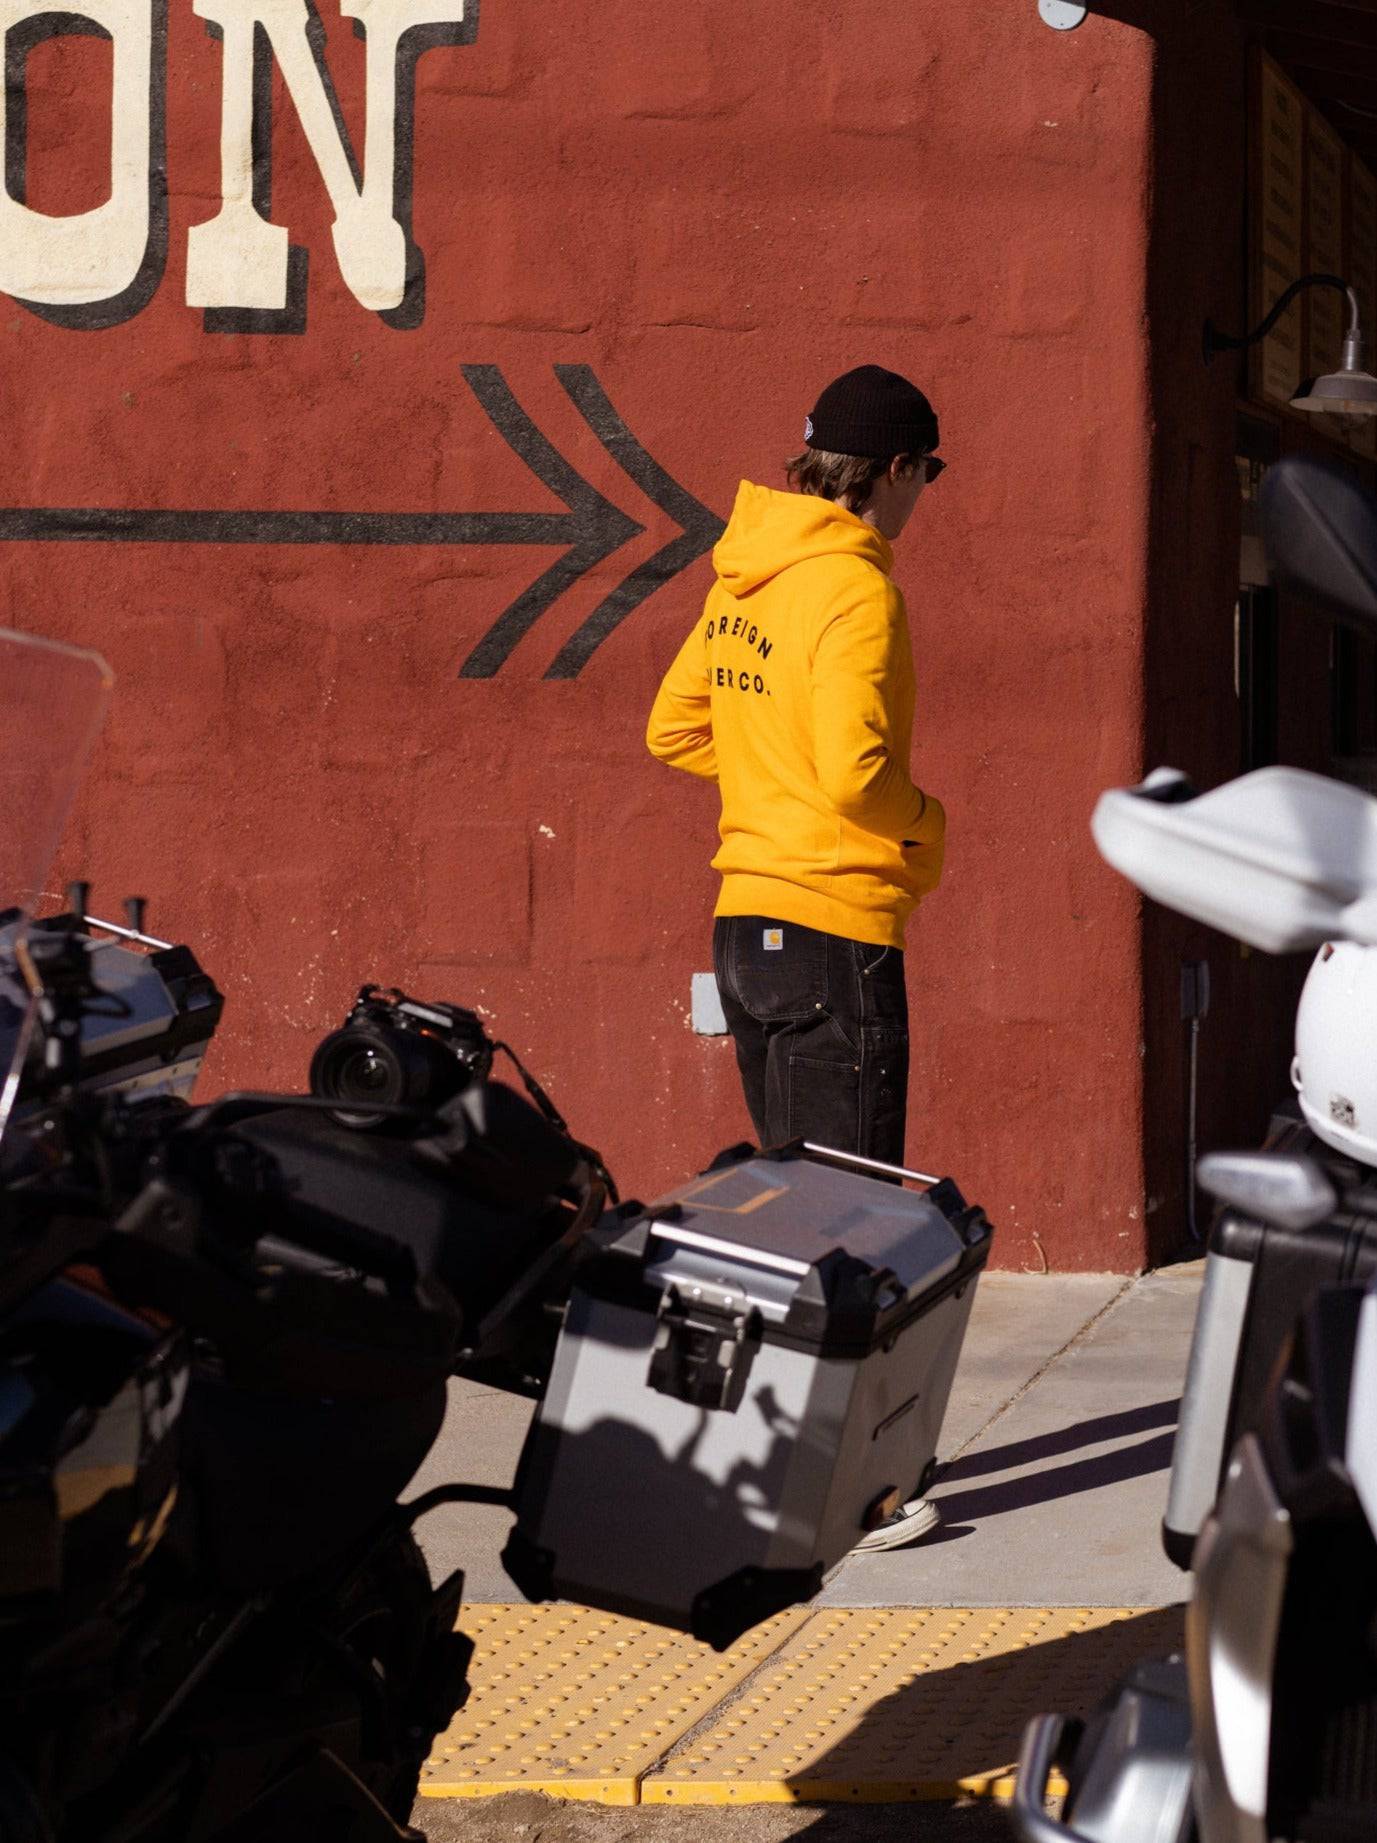 FR. Full Zip Hooded Sweatshirt Yellow - Foreign Rider Co.